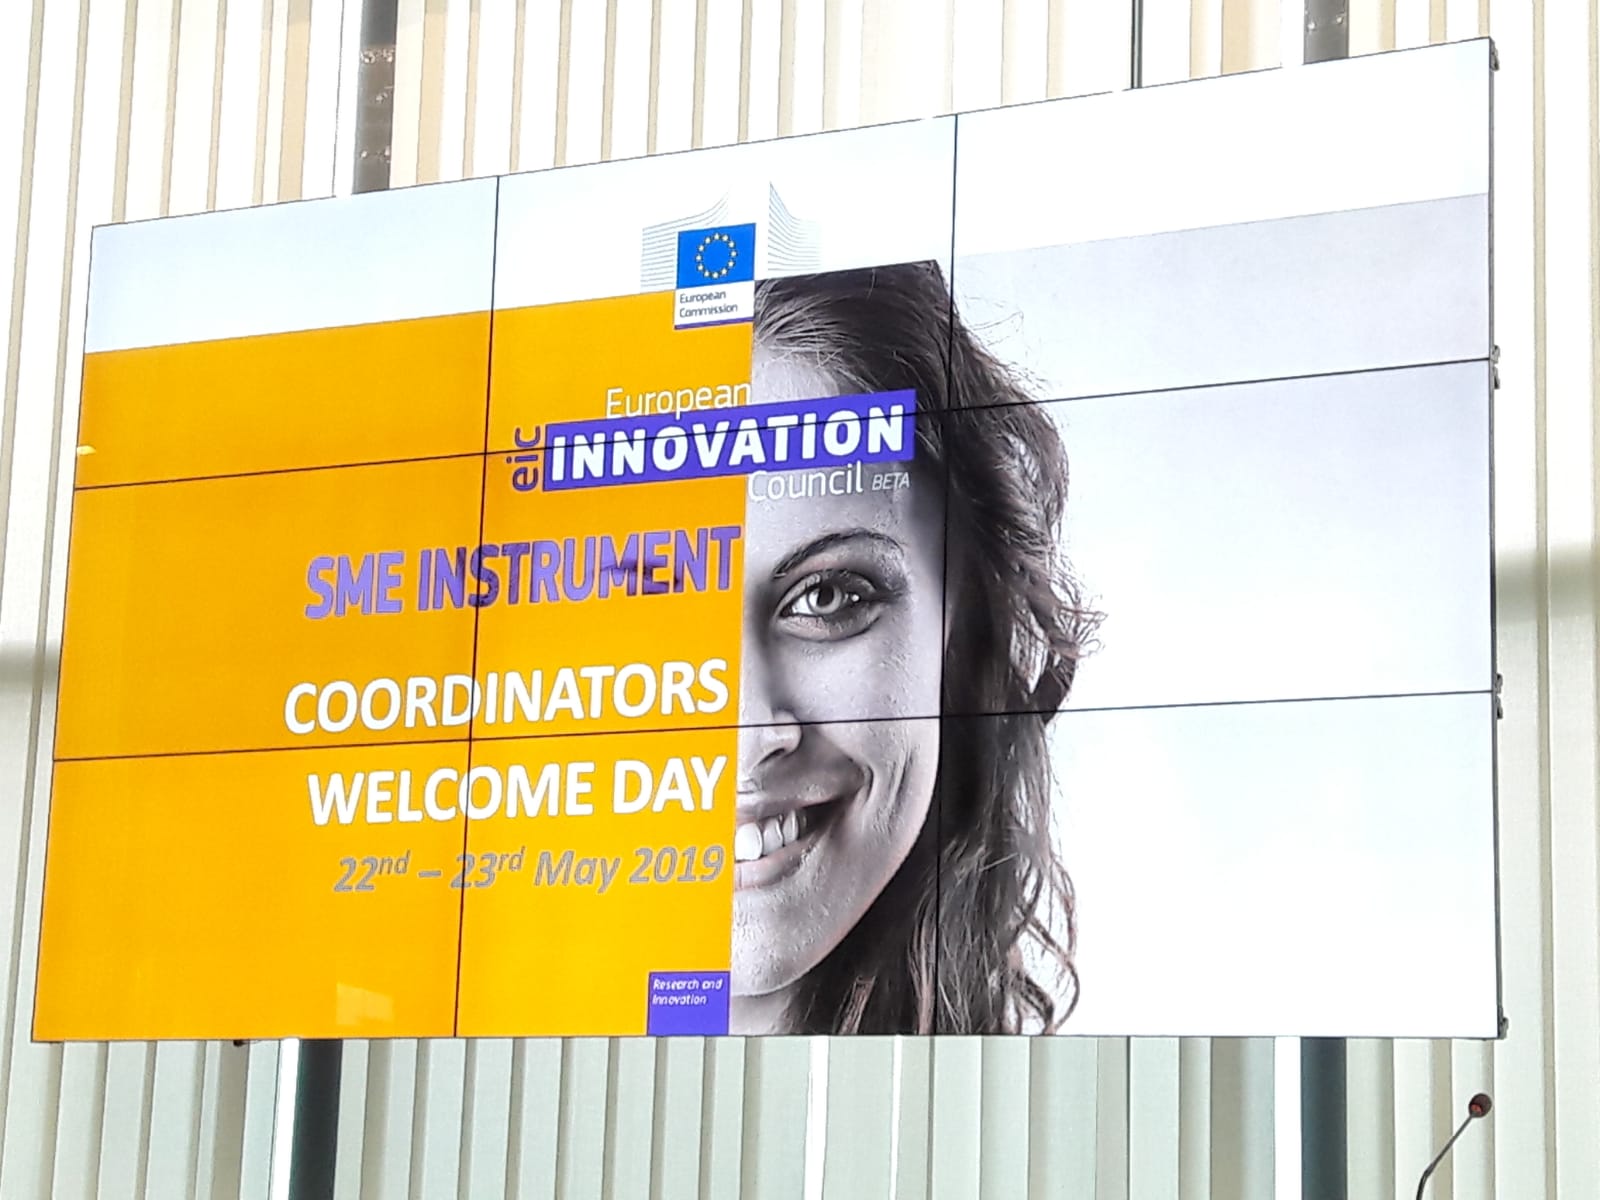 AROMICS' CEO will be present at the SME instrument Wellcome Day